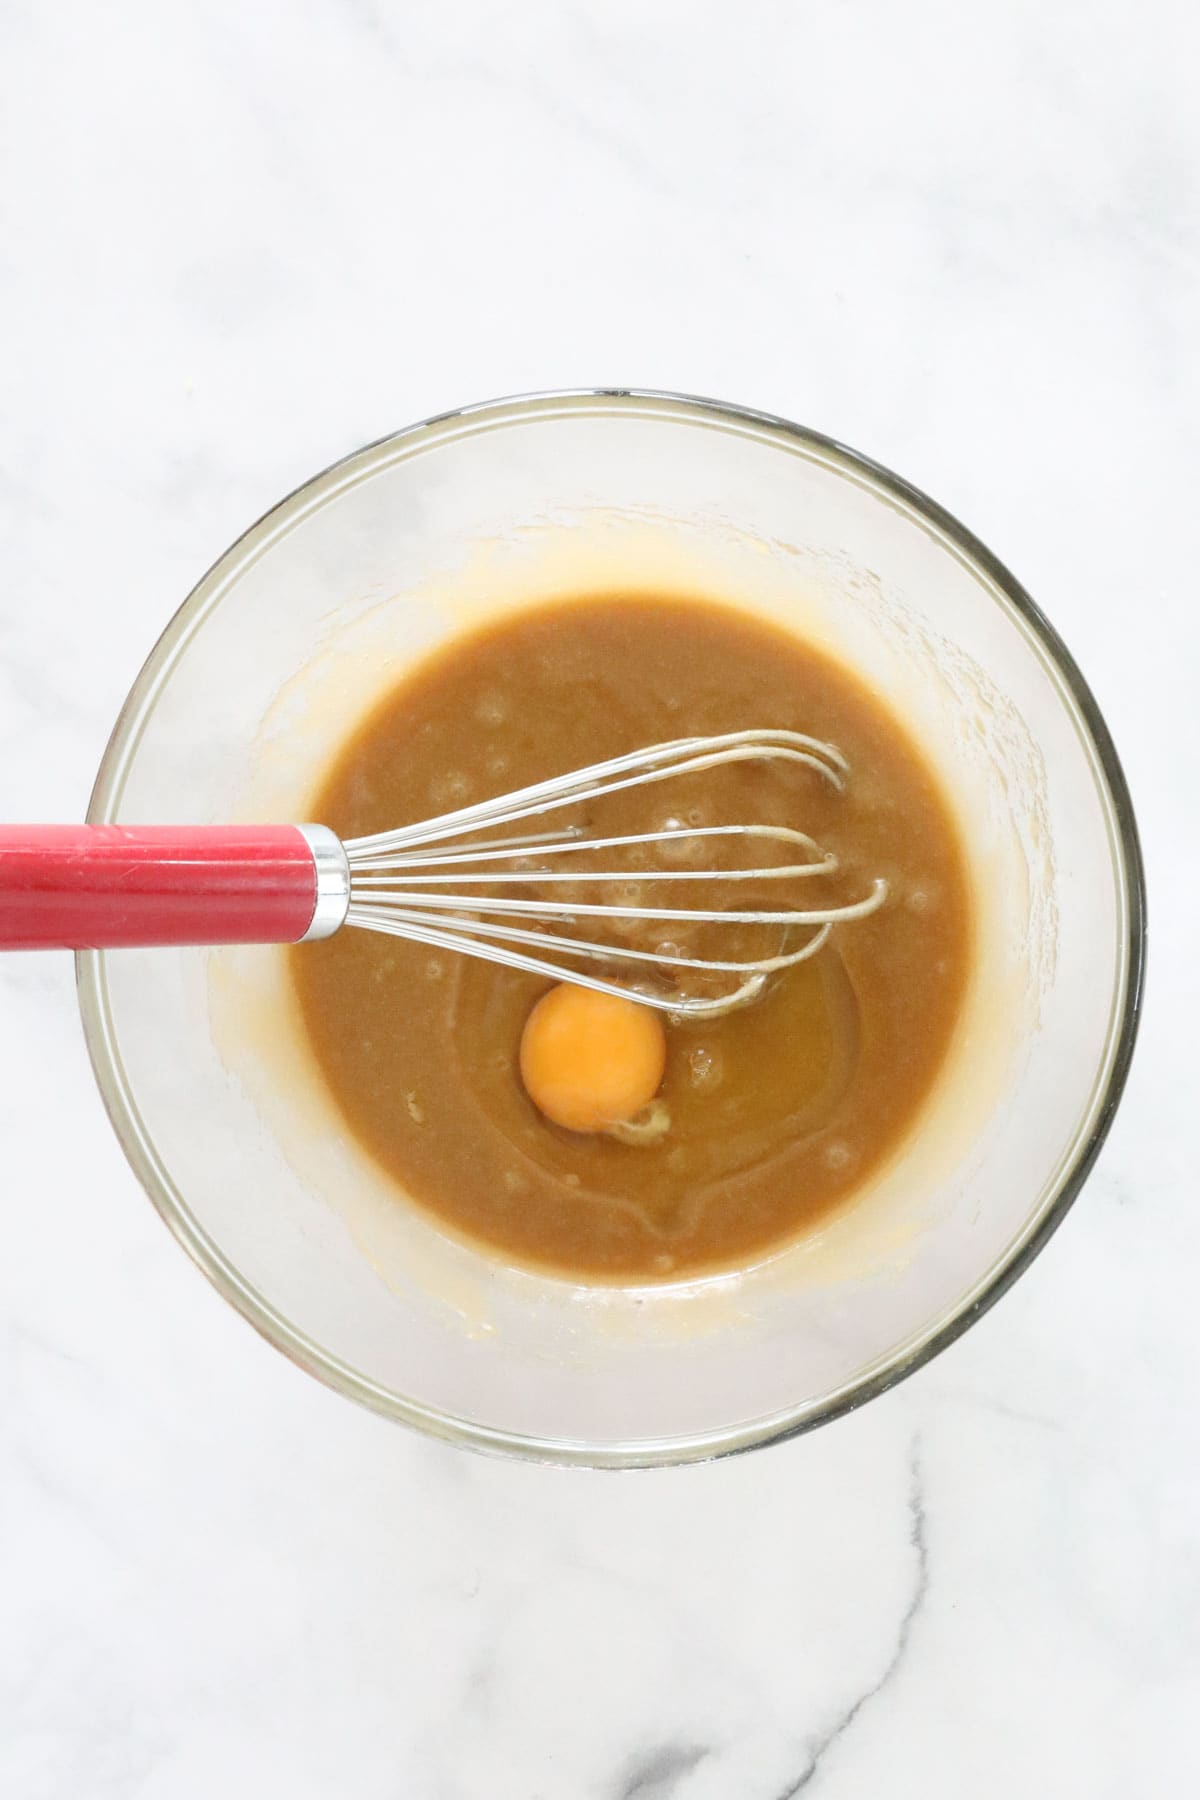 An egg added to the melted butter mixture in a glass bowl with a whisk.